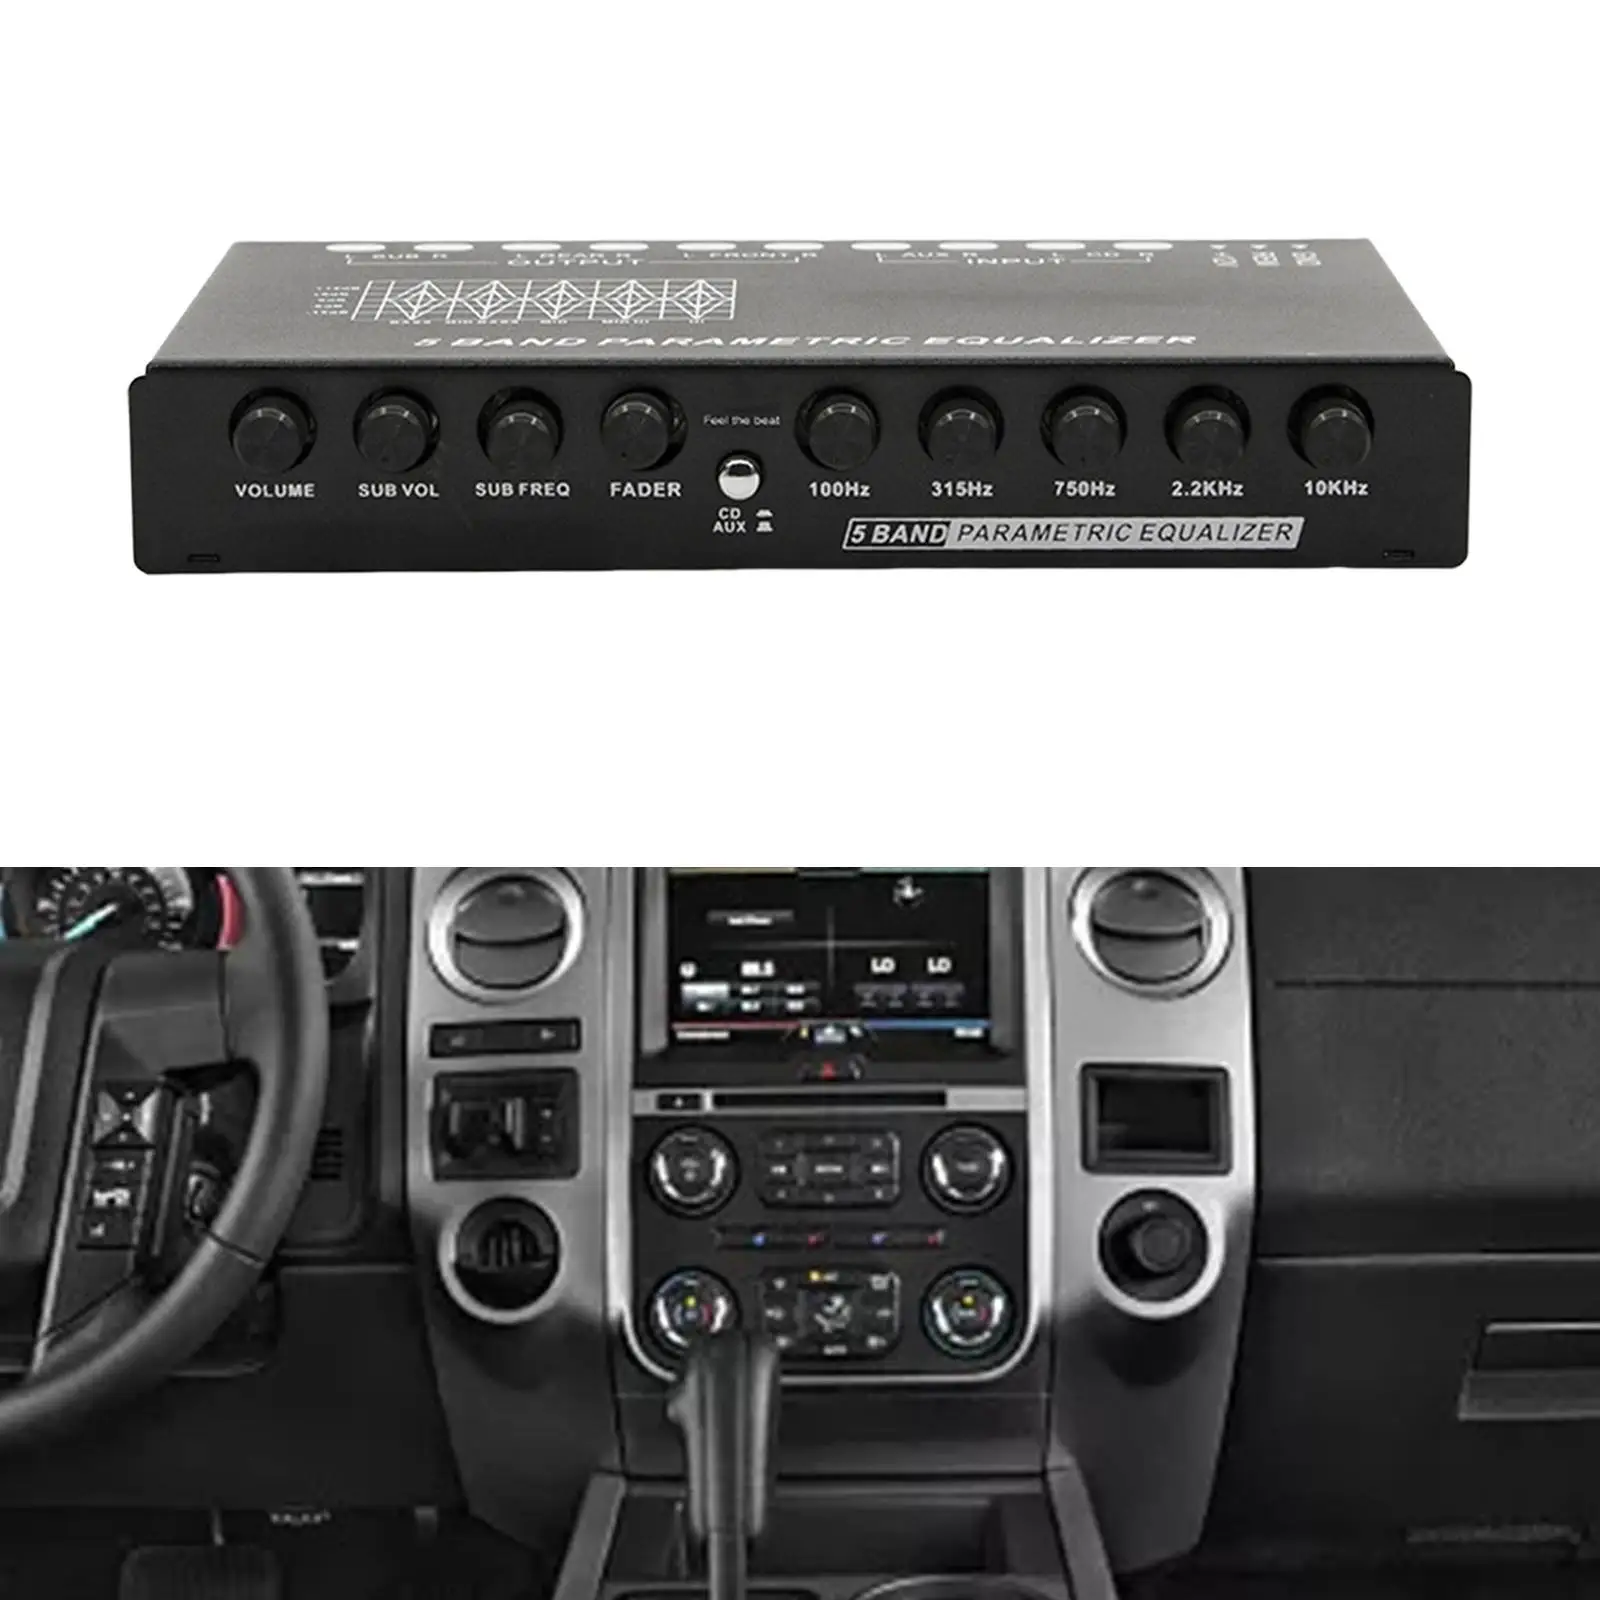 5 Band Car Audio Equalizer Premium High Performance Stylish Durable with CD/AUX Input Select Switch for Boat RV RTV Motorcycle